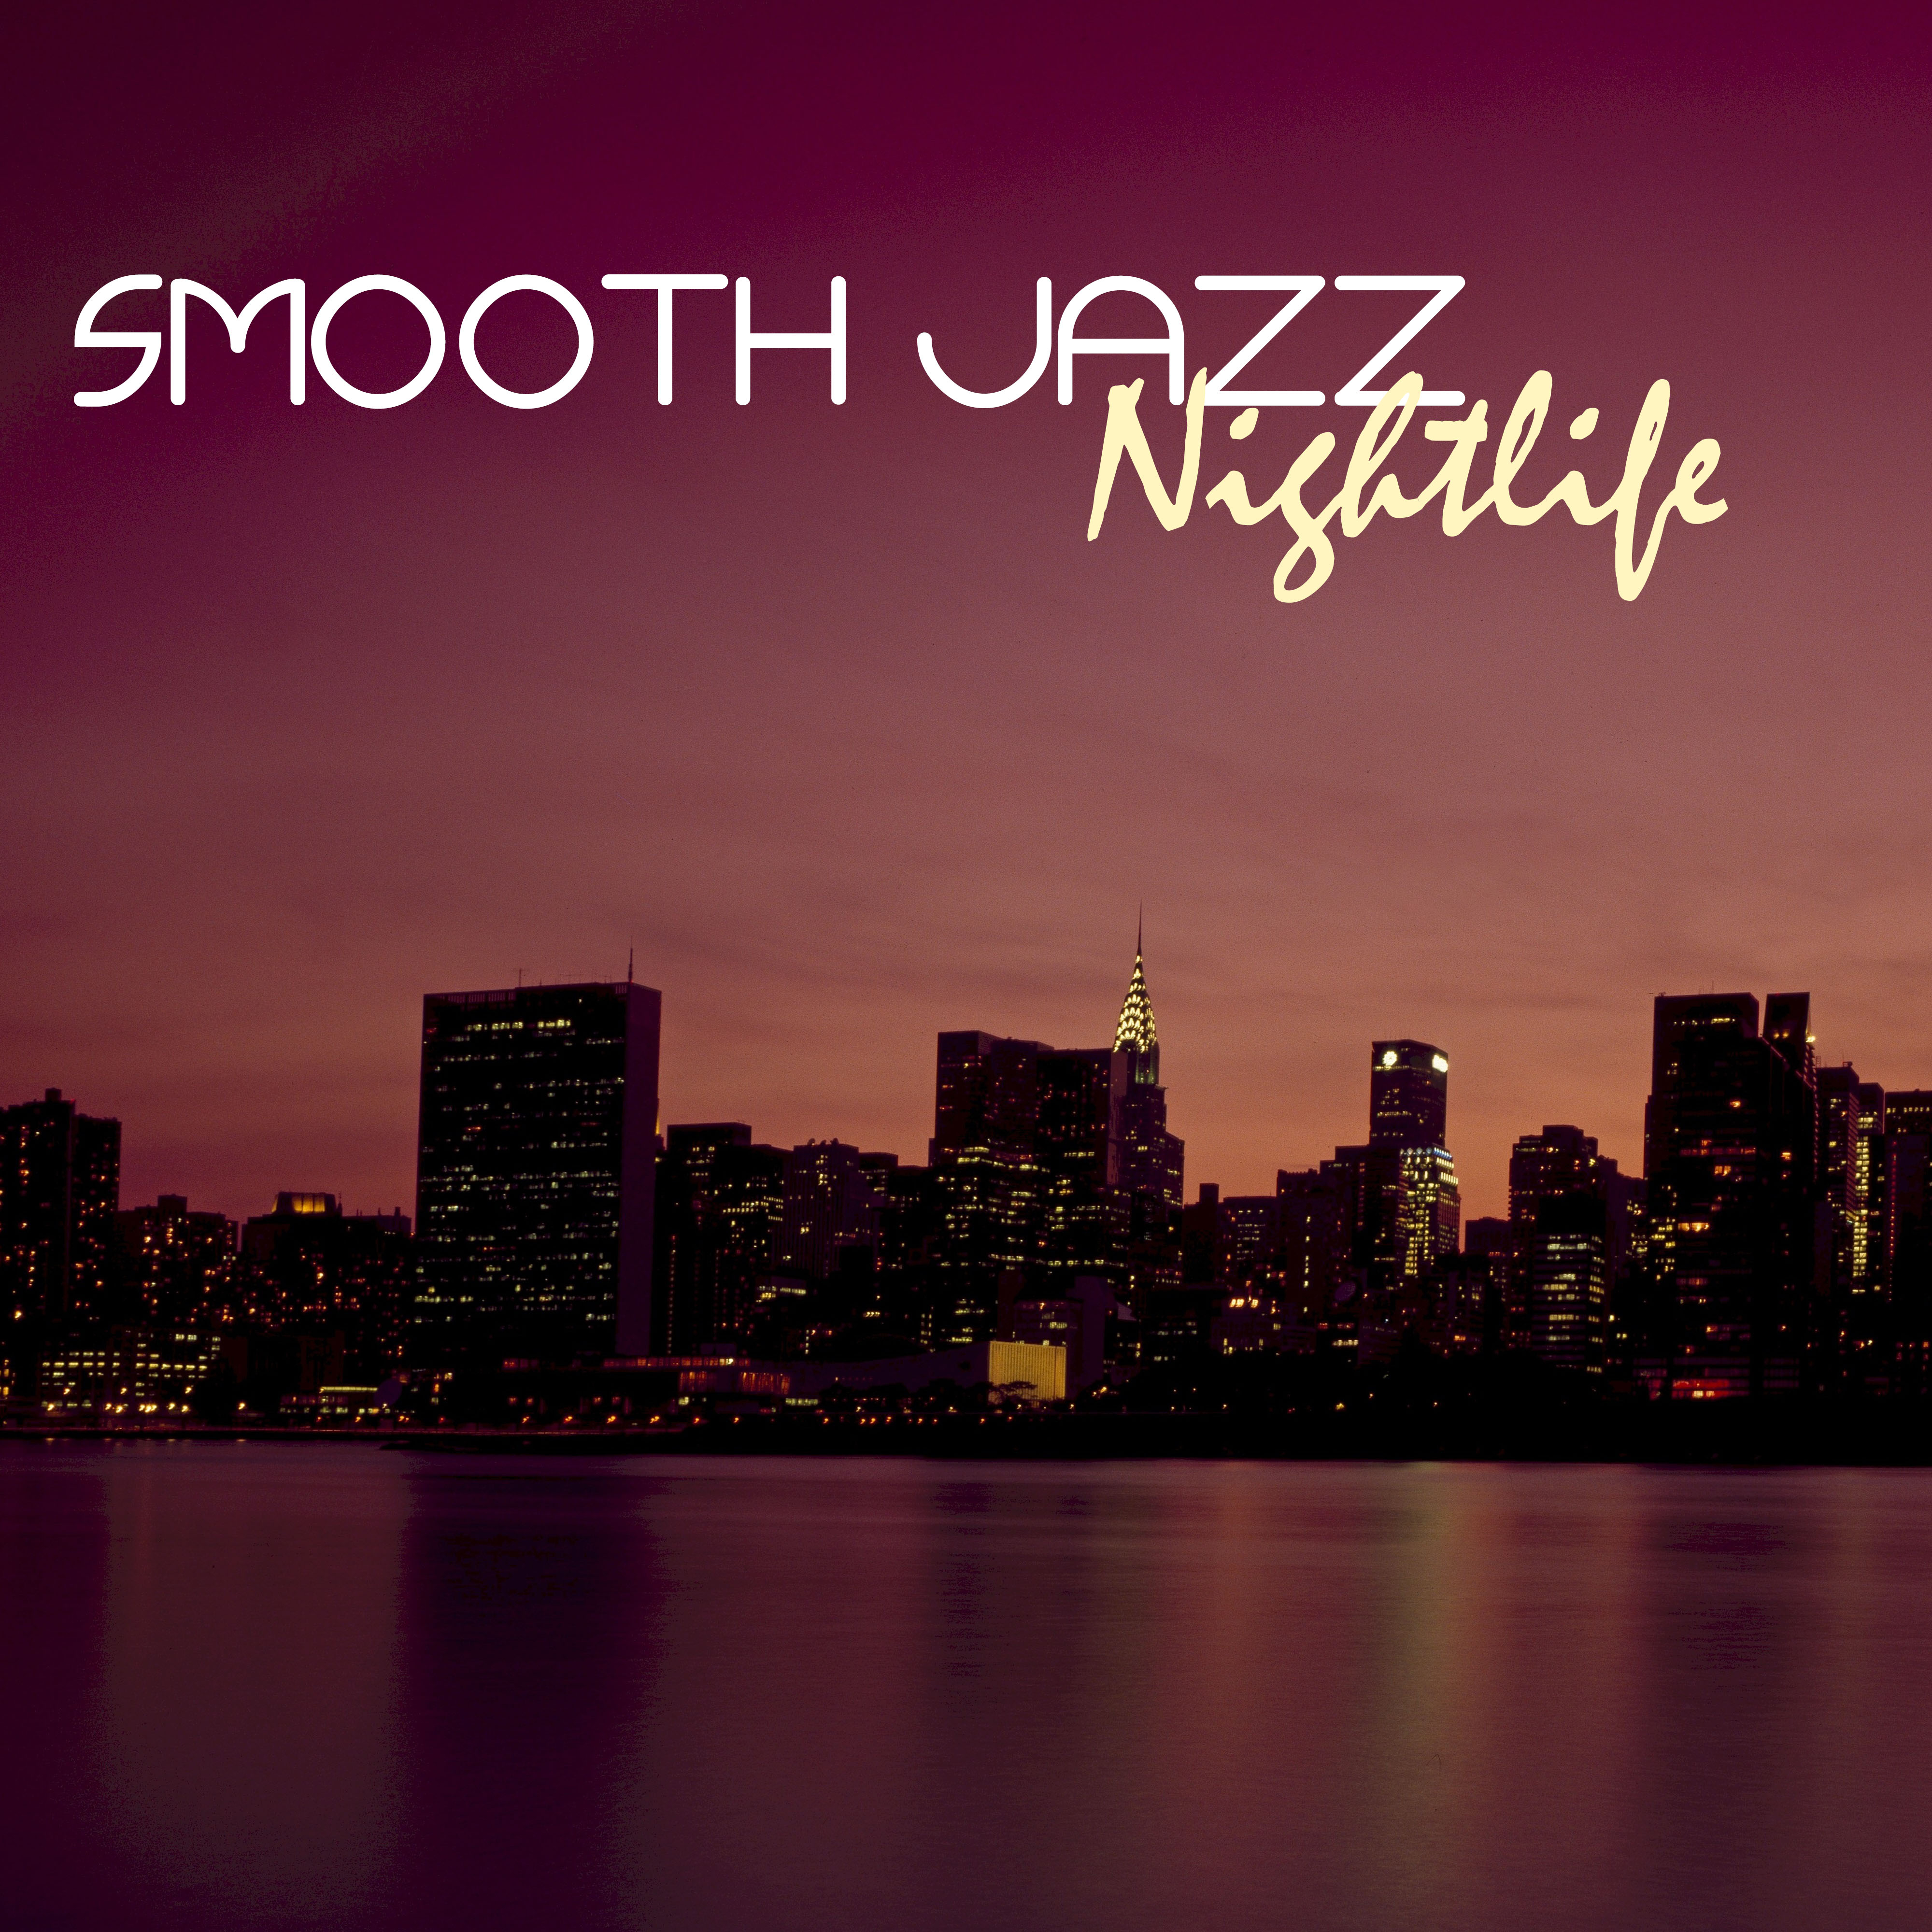 Smooth Jazz Nightlife - Erotic Chillout Lounge Songs, Best Club Mood Collection of Ambient Background Music